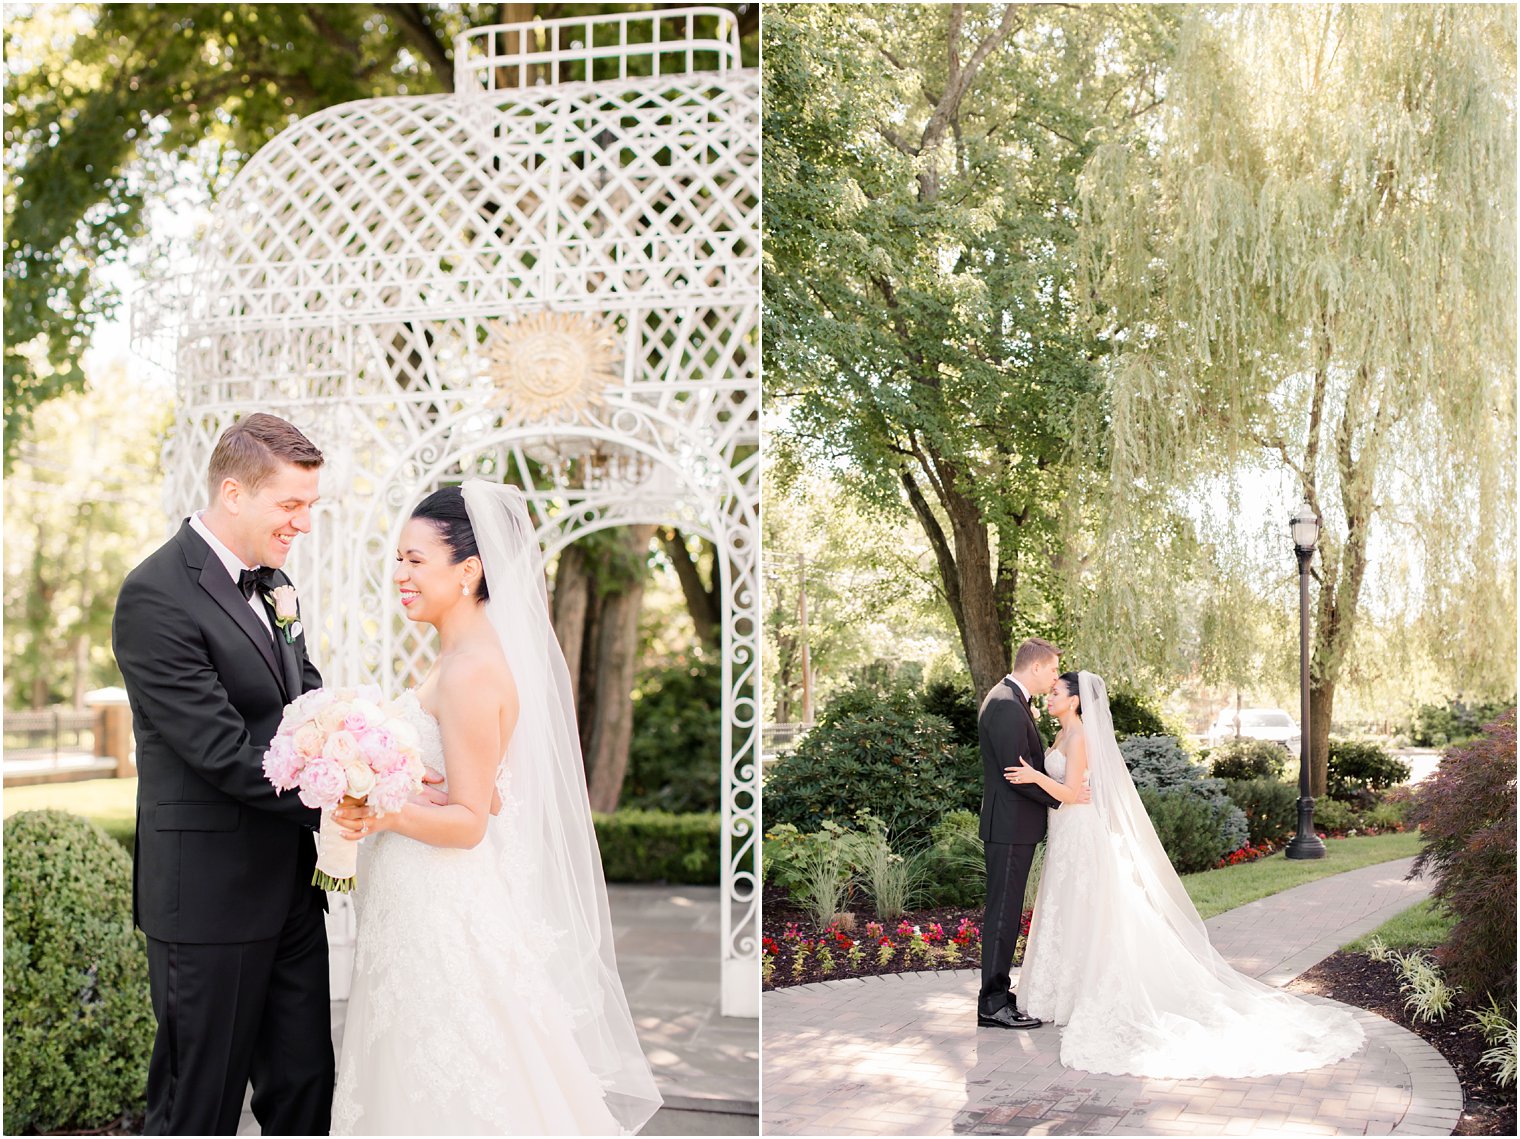 candid moments between bride and groom at Rockleigh Country Club